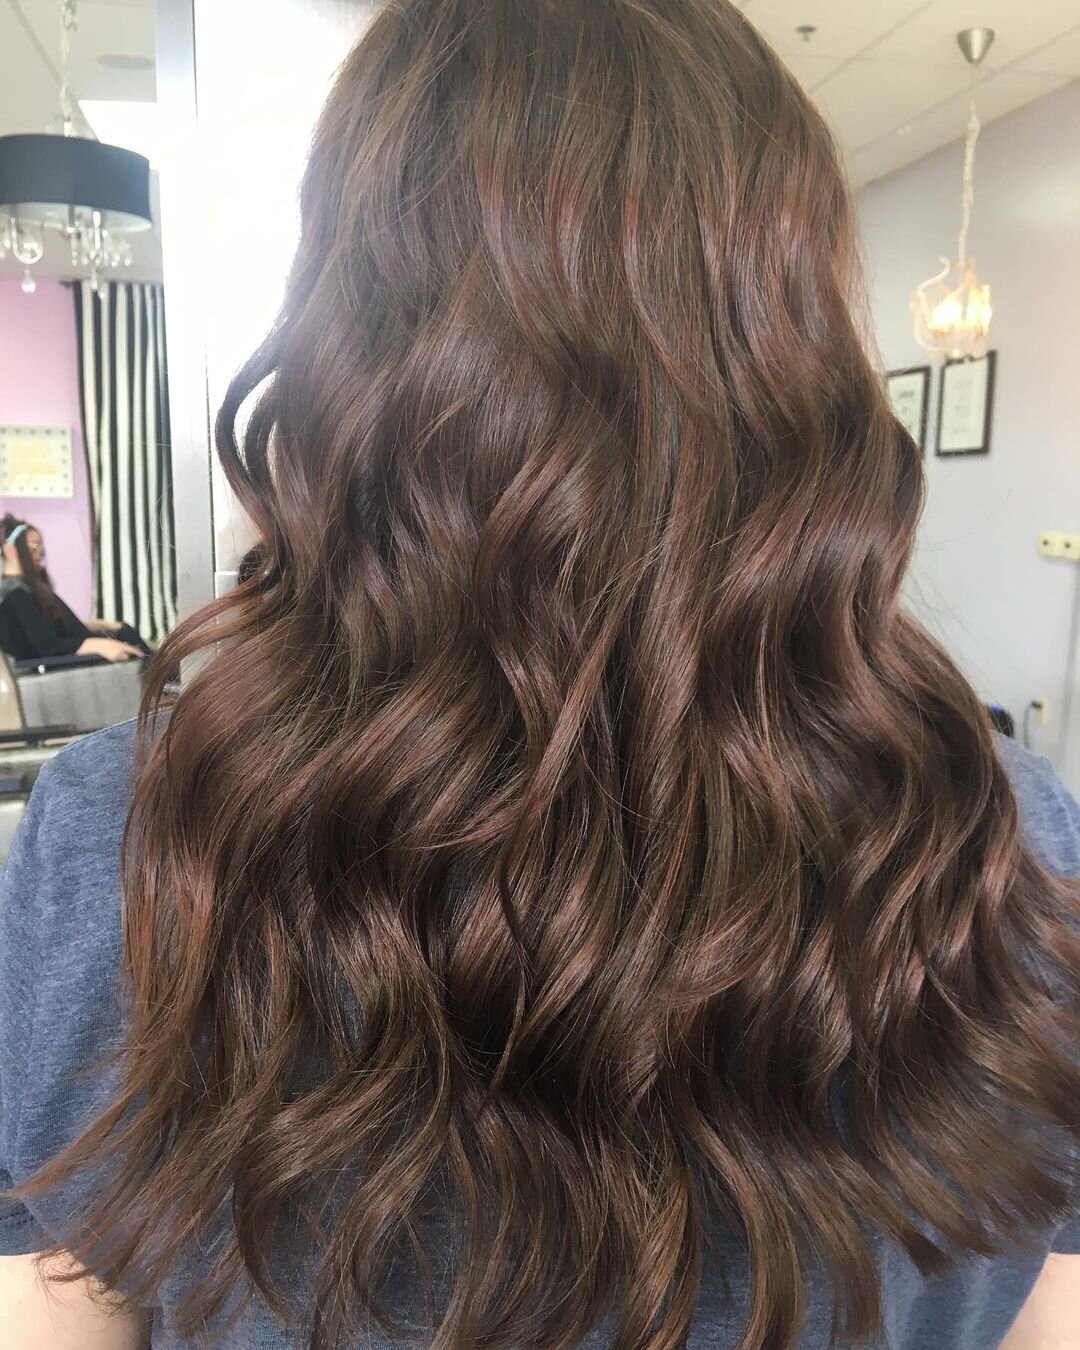 Rich Chocolate Hair Color